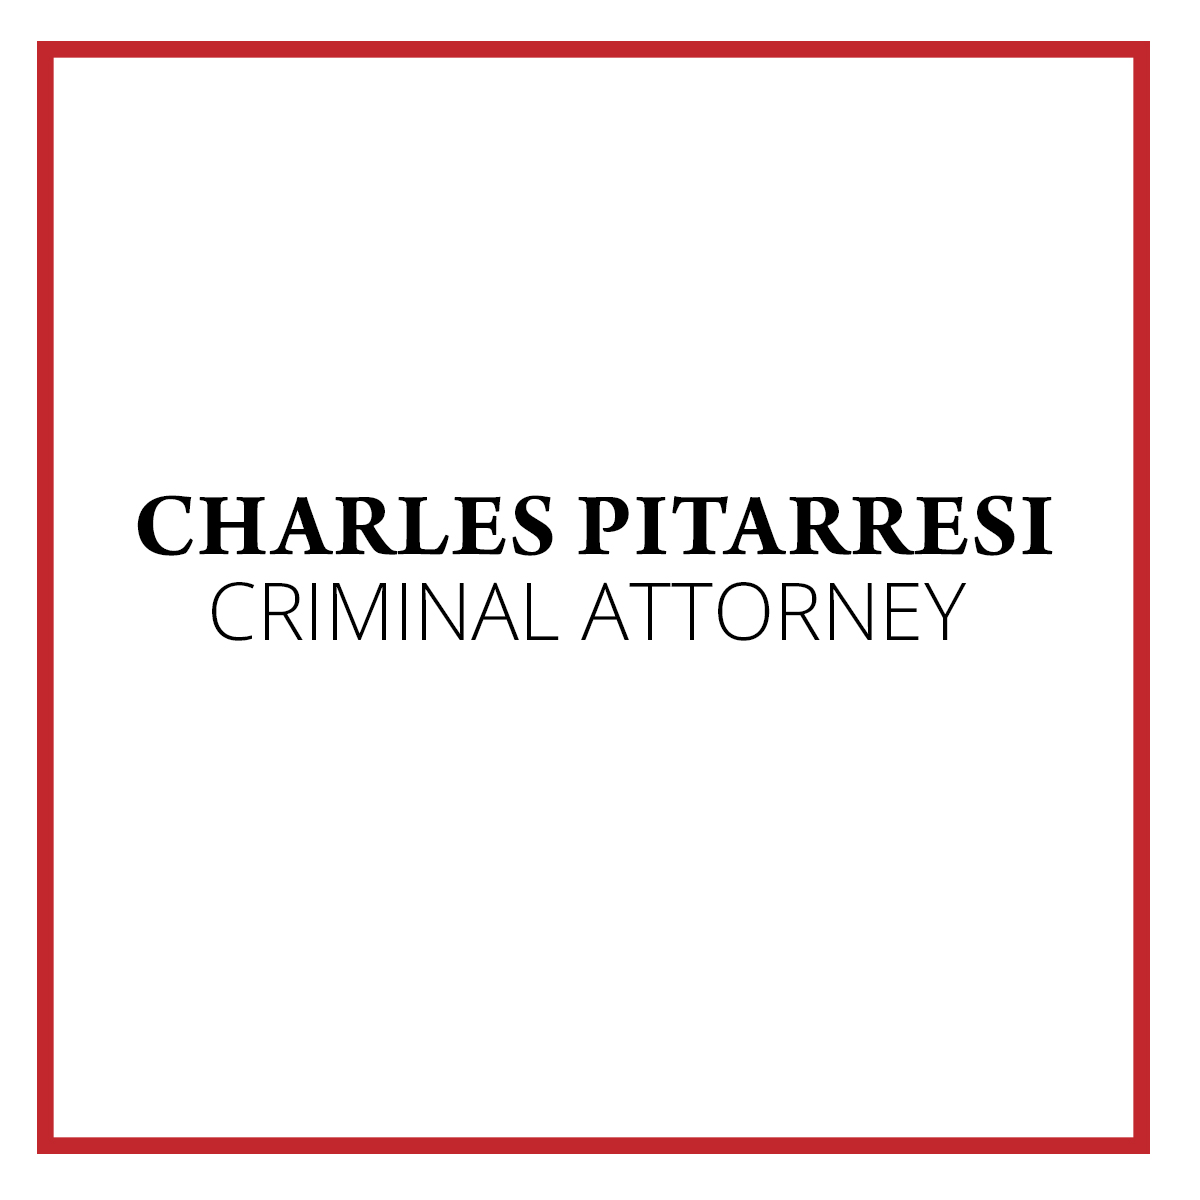 You are currently viewing Charles Pitarresi Criminal Attorney